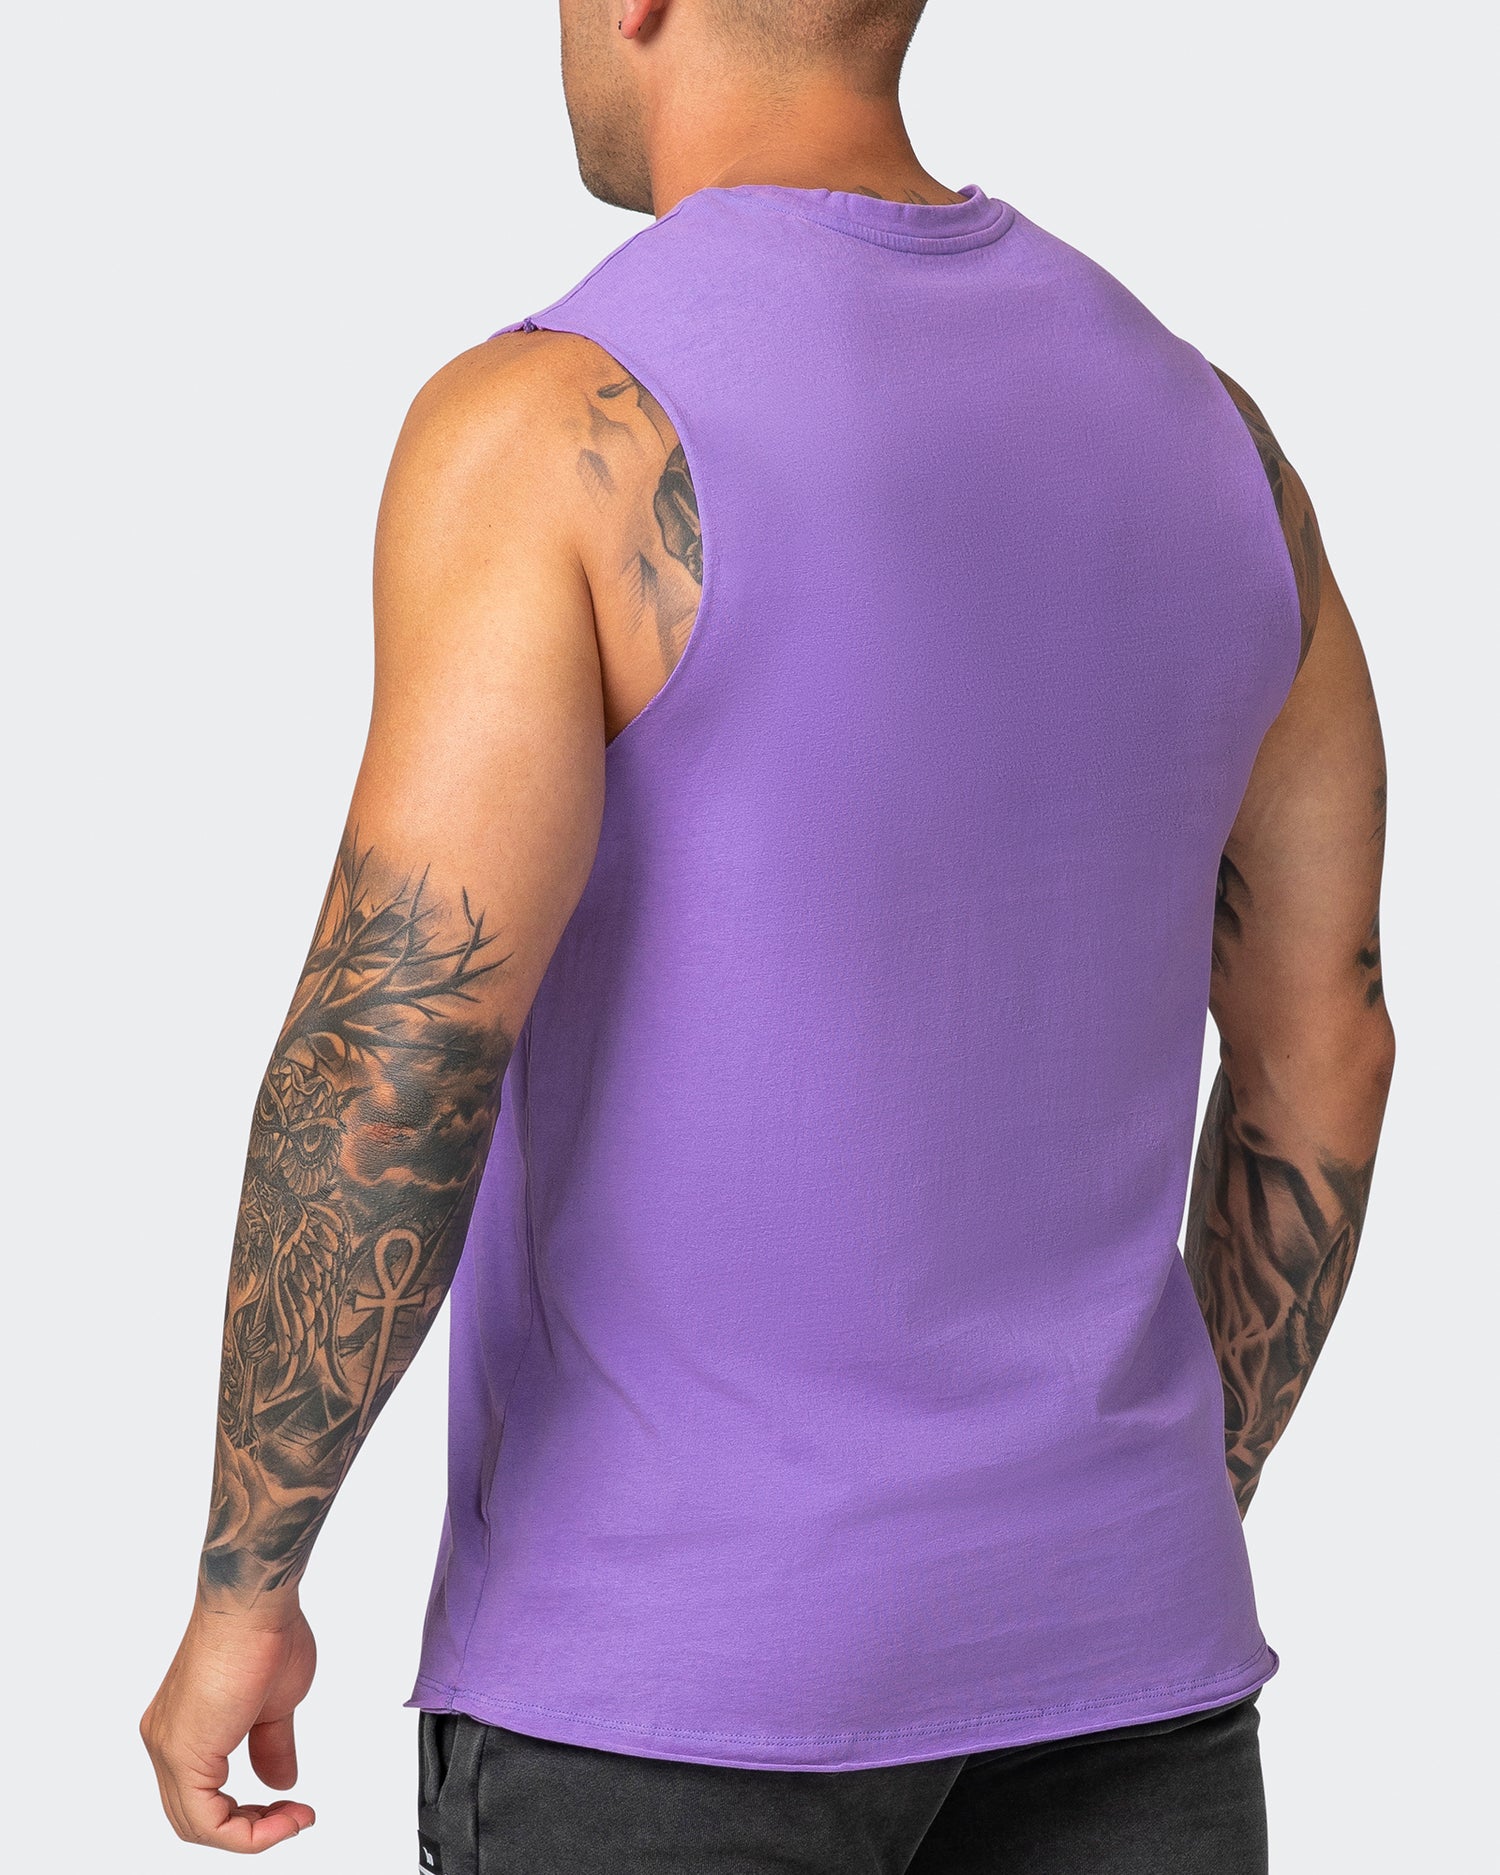 Classic Vintage Tank - Washed Aster Purple